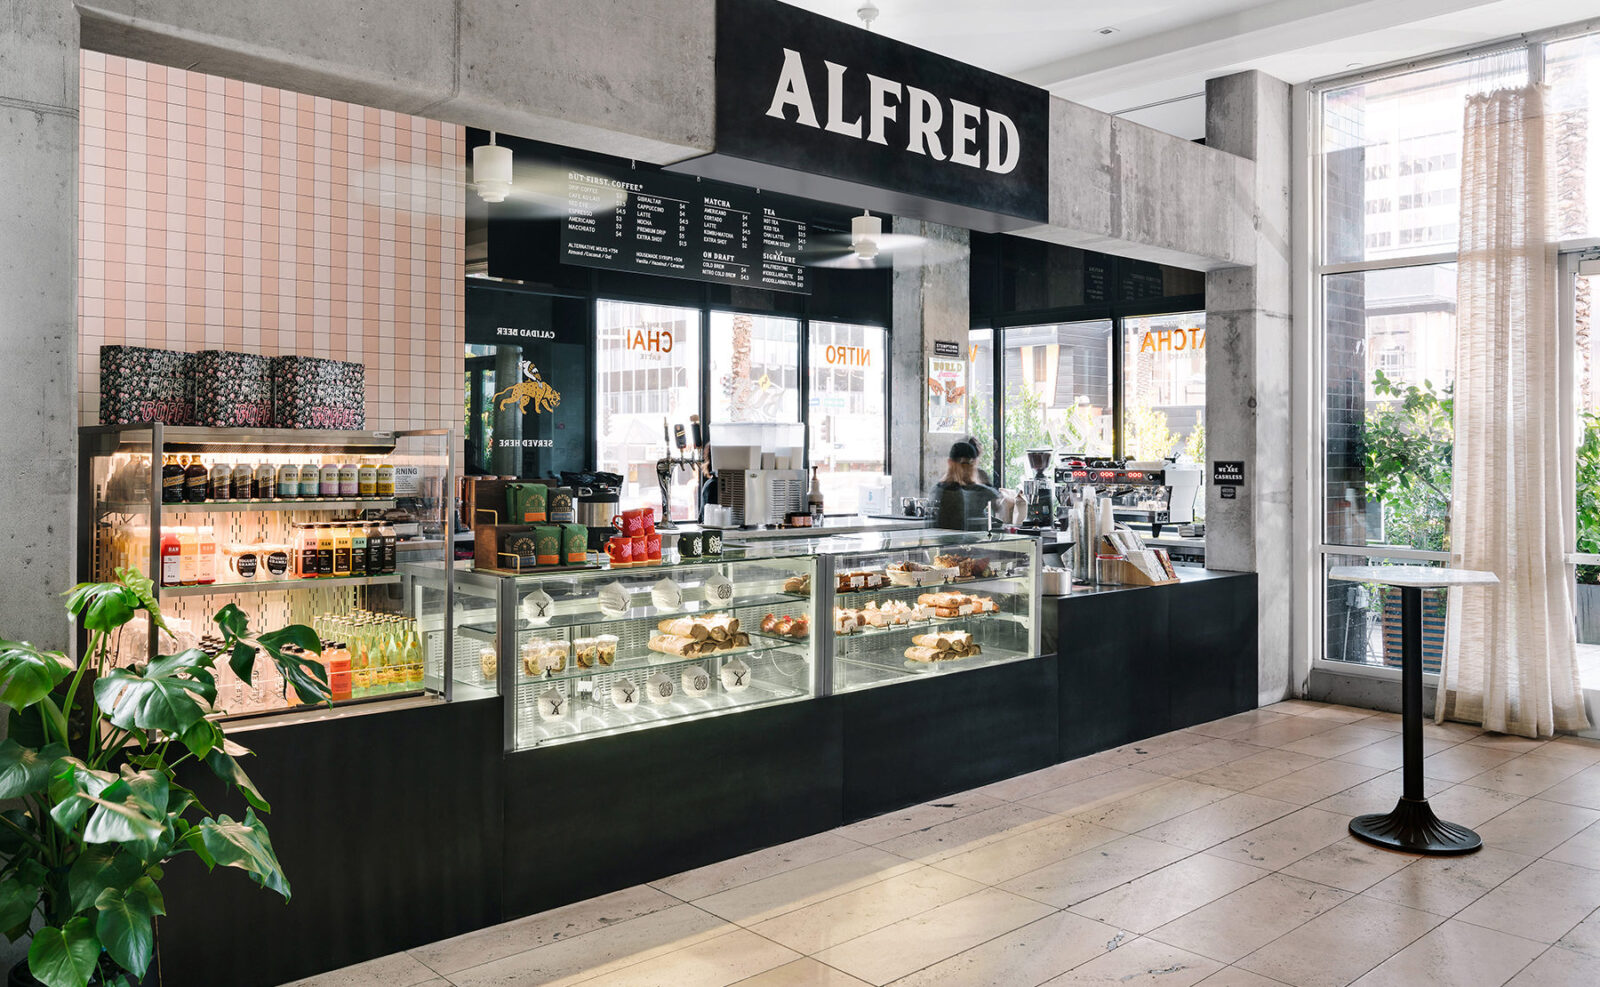 A well-decorated, neat, and clean Alfred Brands bakery store with transparent glass windows.